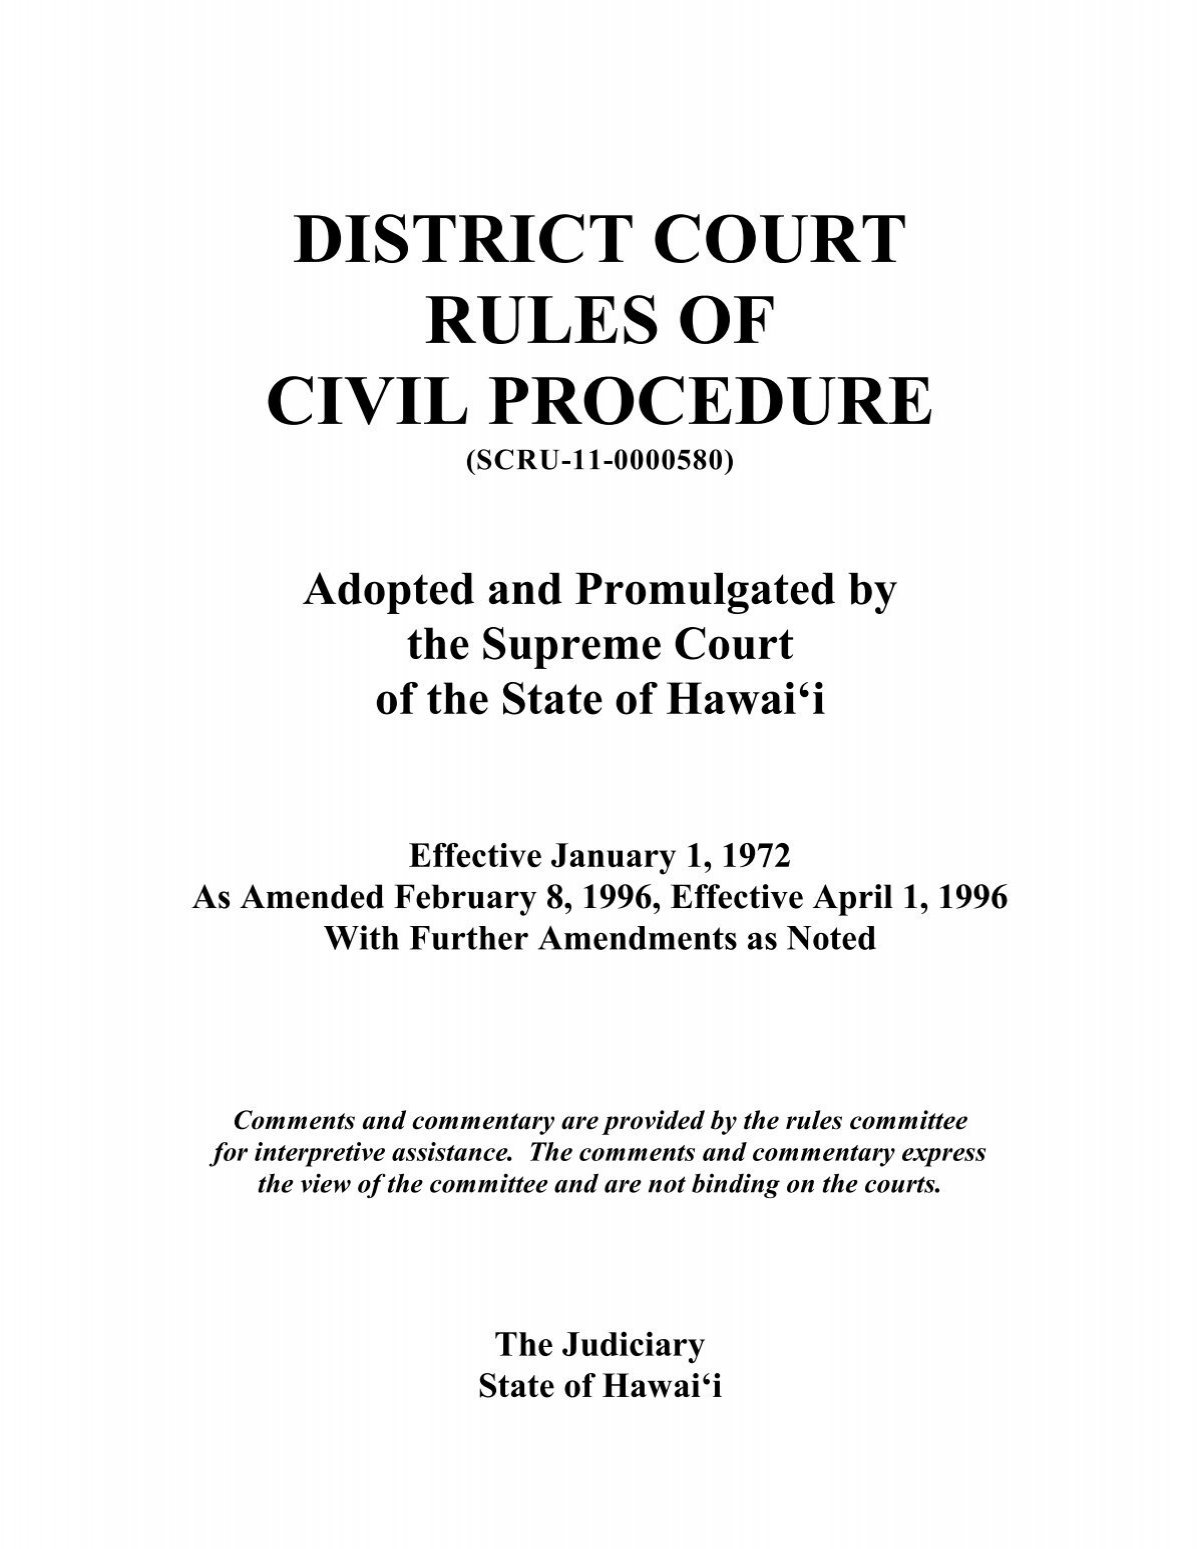 district court rules of civil procedure Hawaii State Judiciary